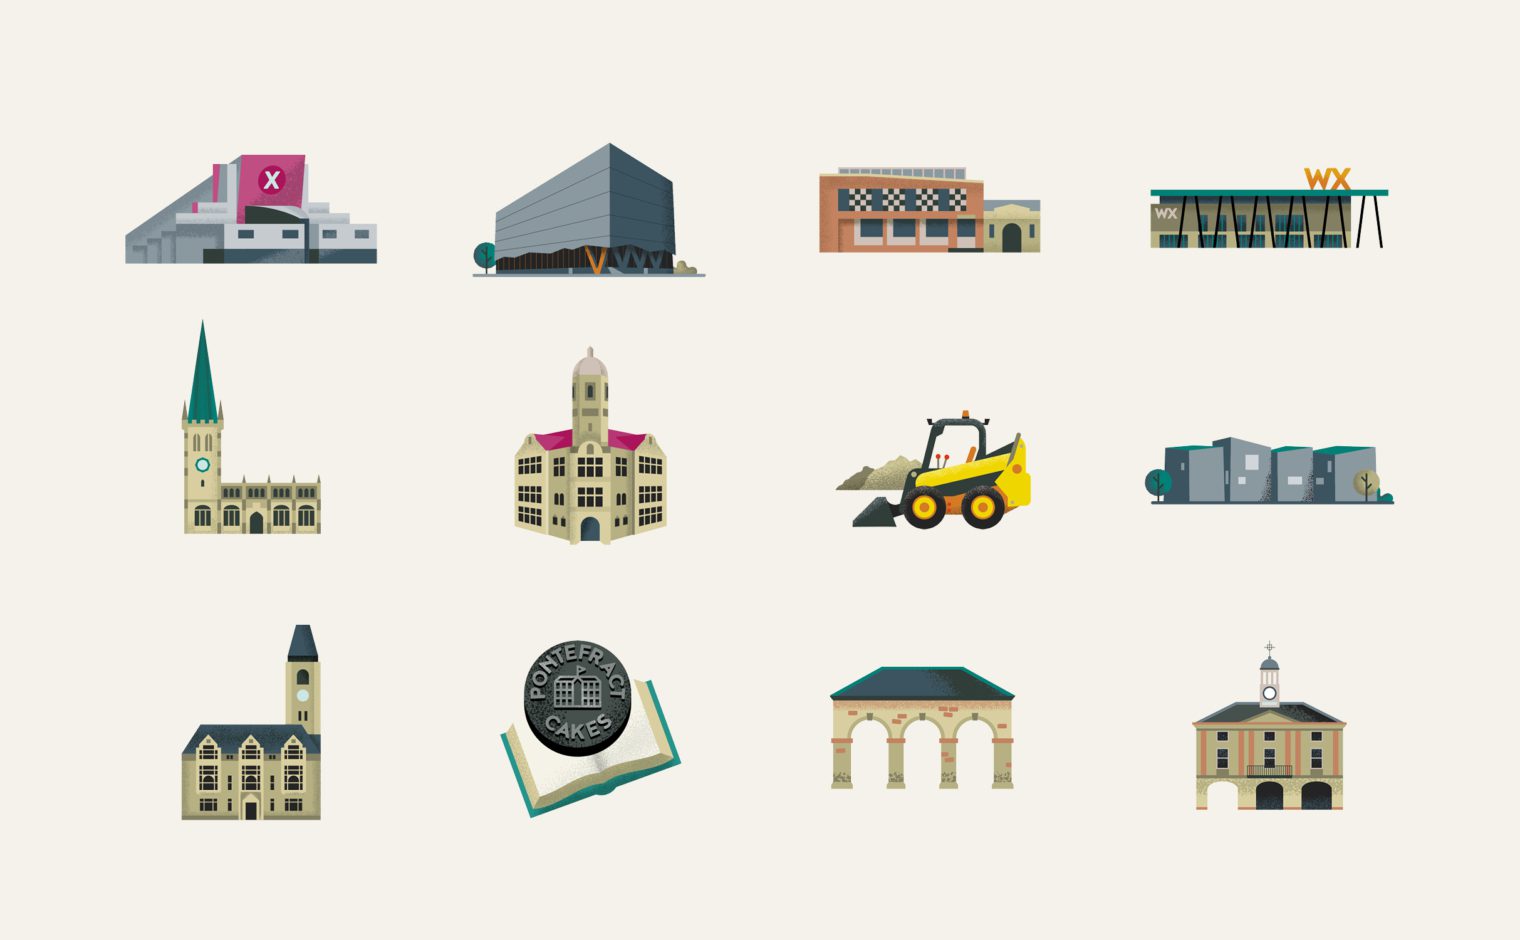 Visitor attraction illustrations for Experience Wakefield